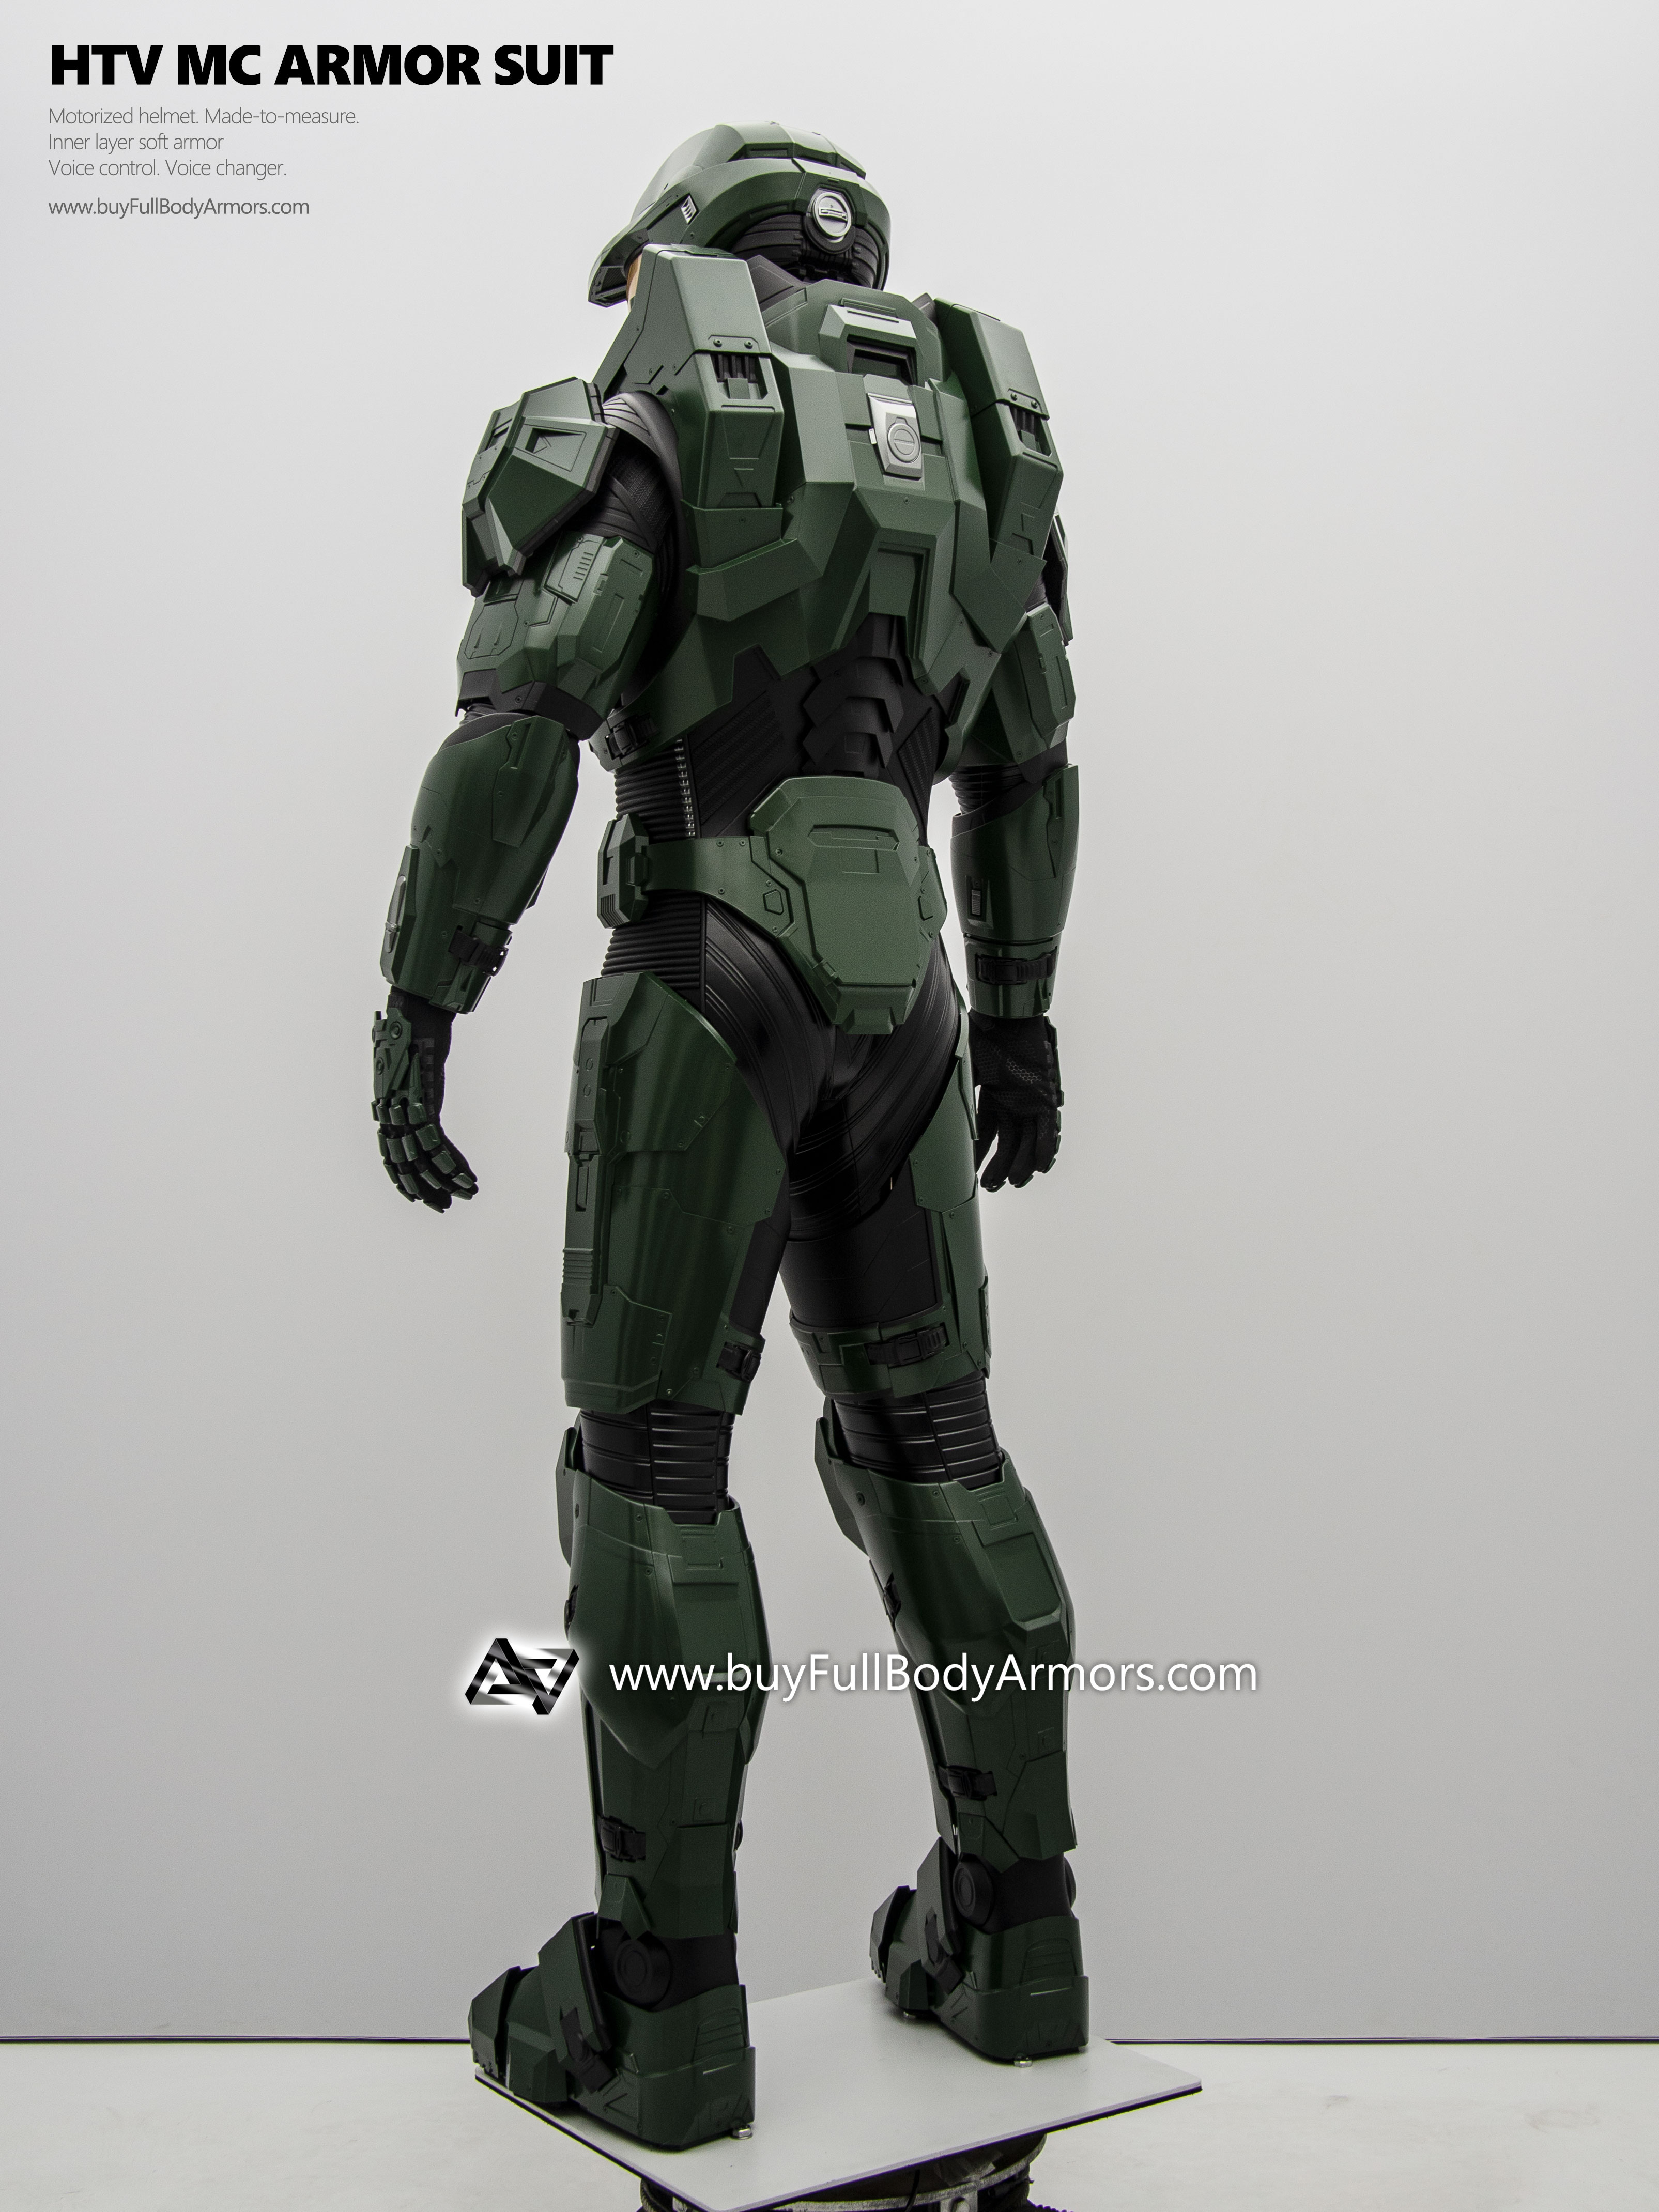 Wearable MASTER CHIEF ARMOR SUIT (Halo Infinity and Halo TV Series Season 2 Version) back side